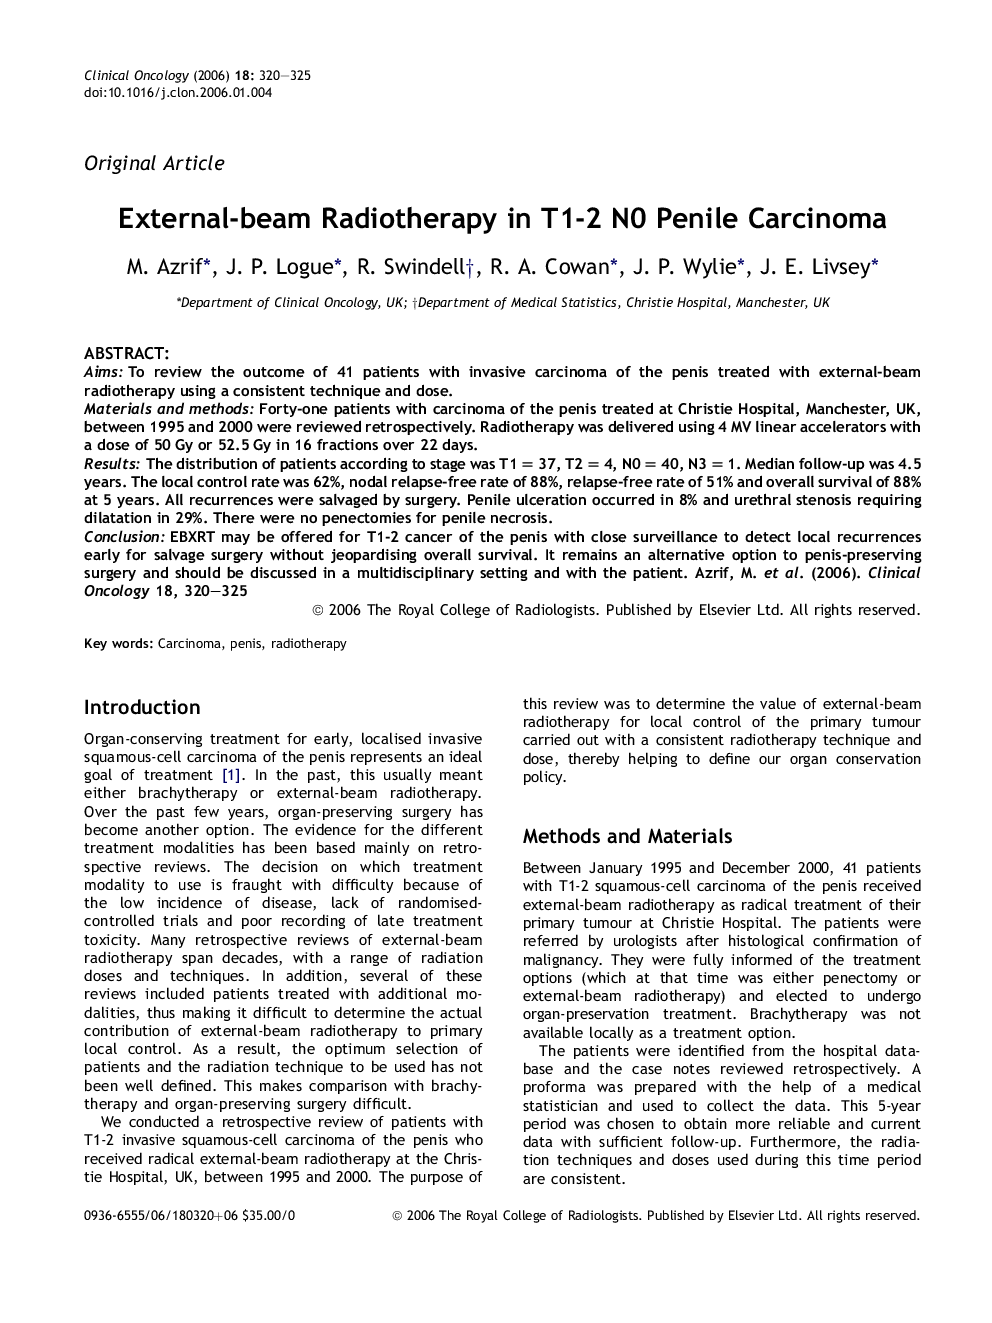 External-beam Radiotherapy in T1-2 N0 Penile Carcinoma